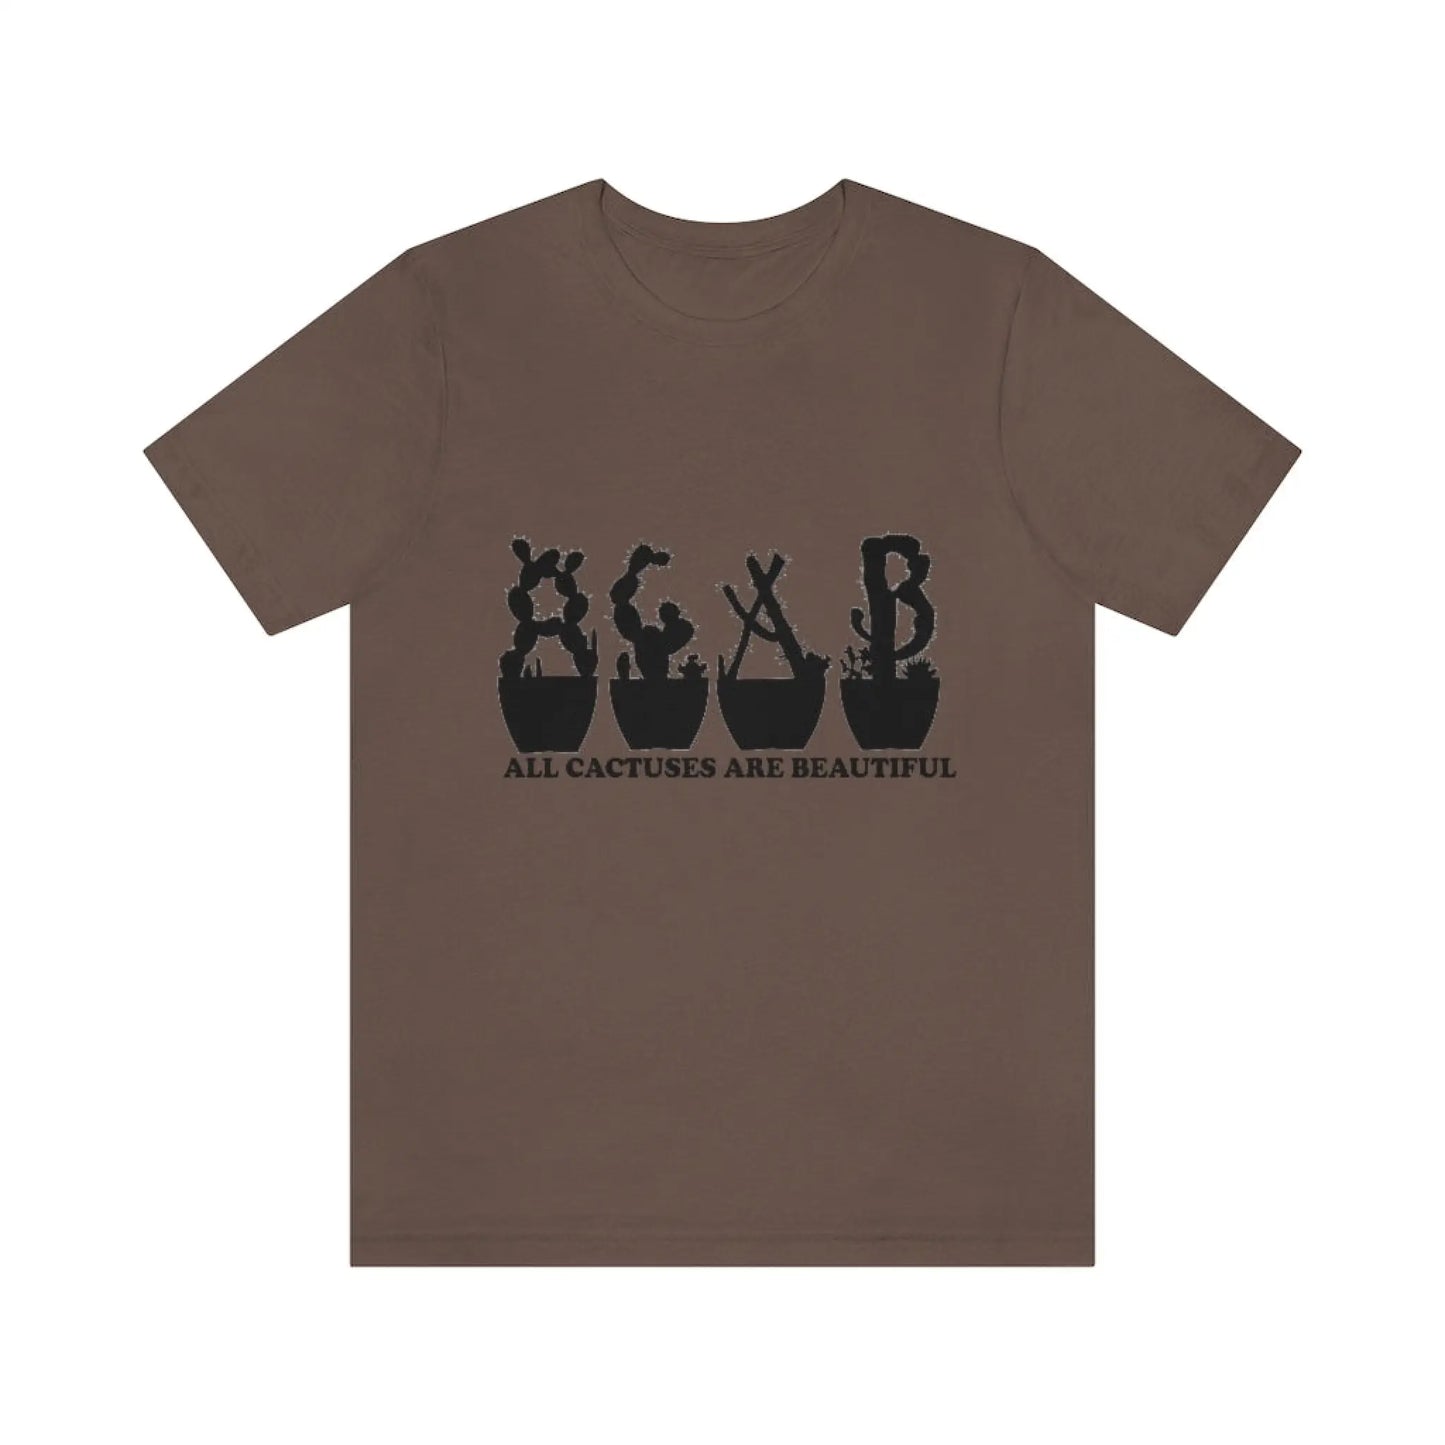 Shirts XL - All Cactuses Are Beautiful - Brown / T-Shirt